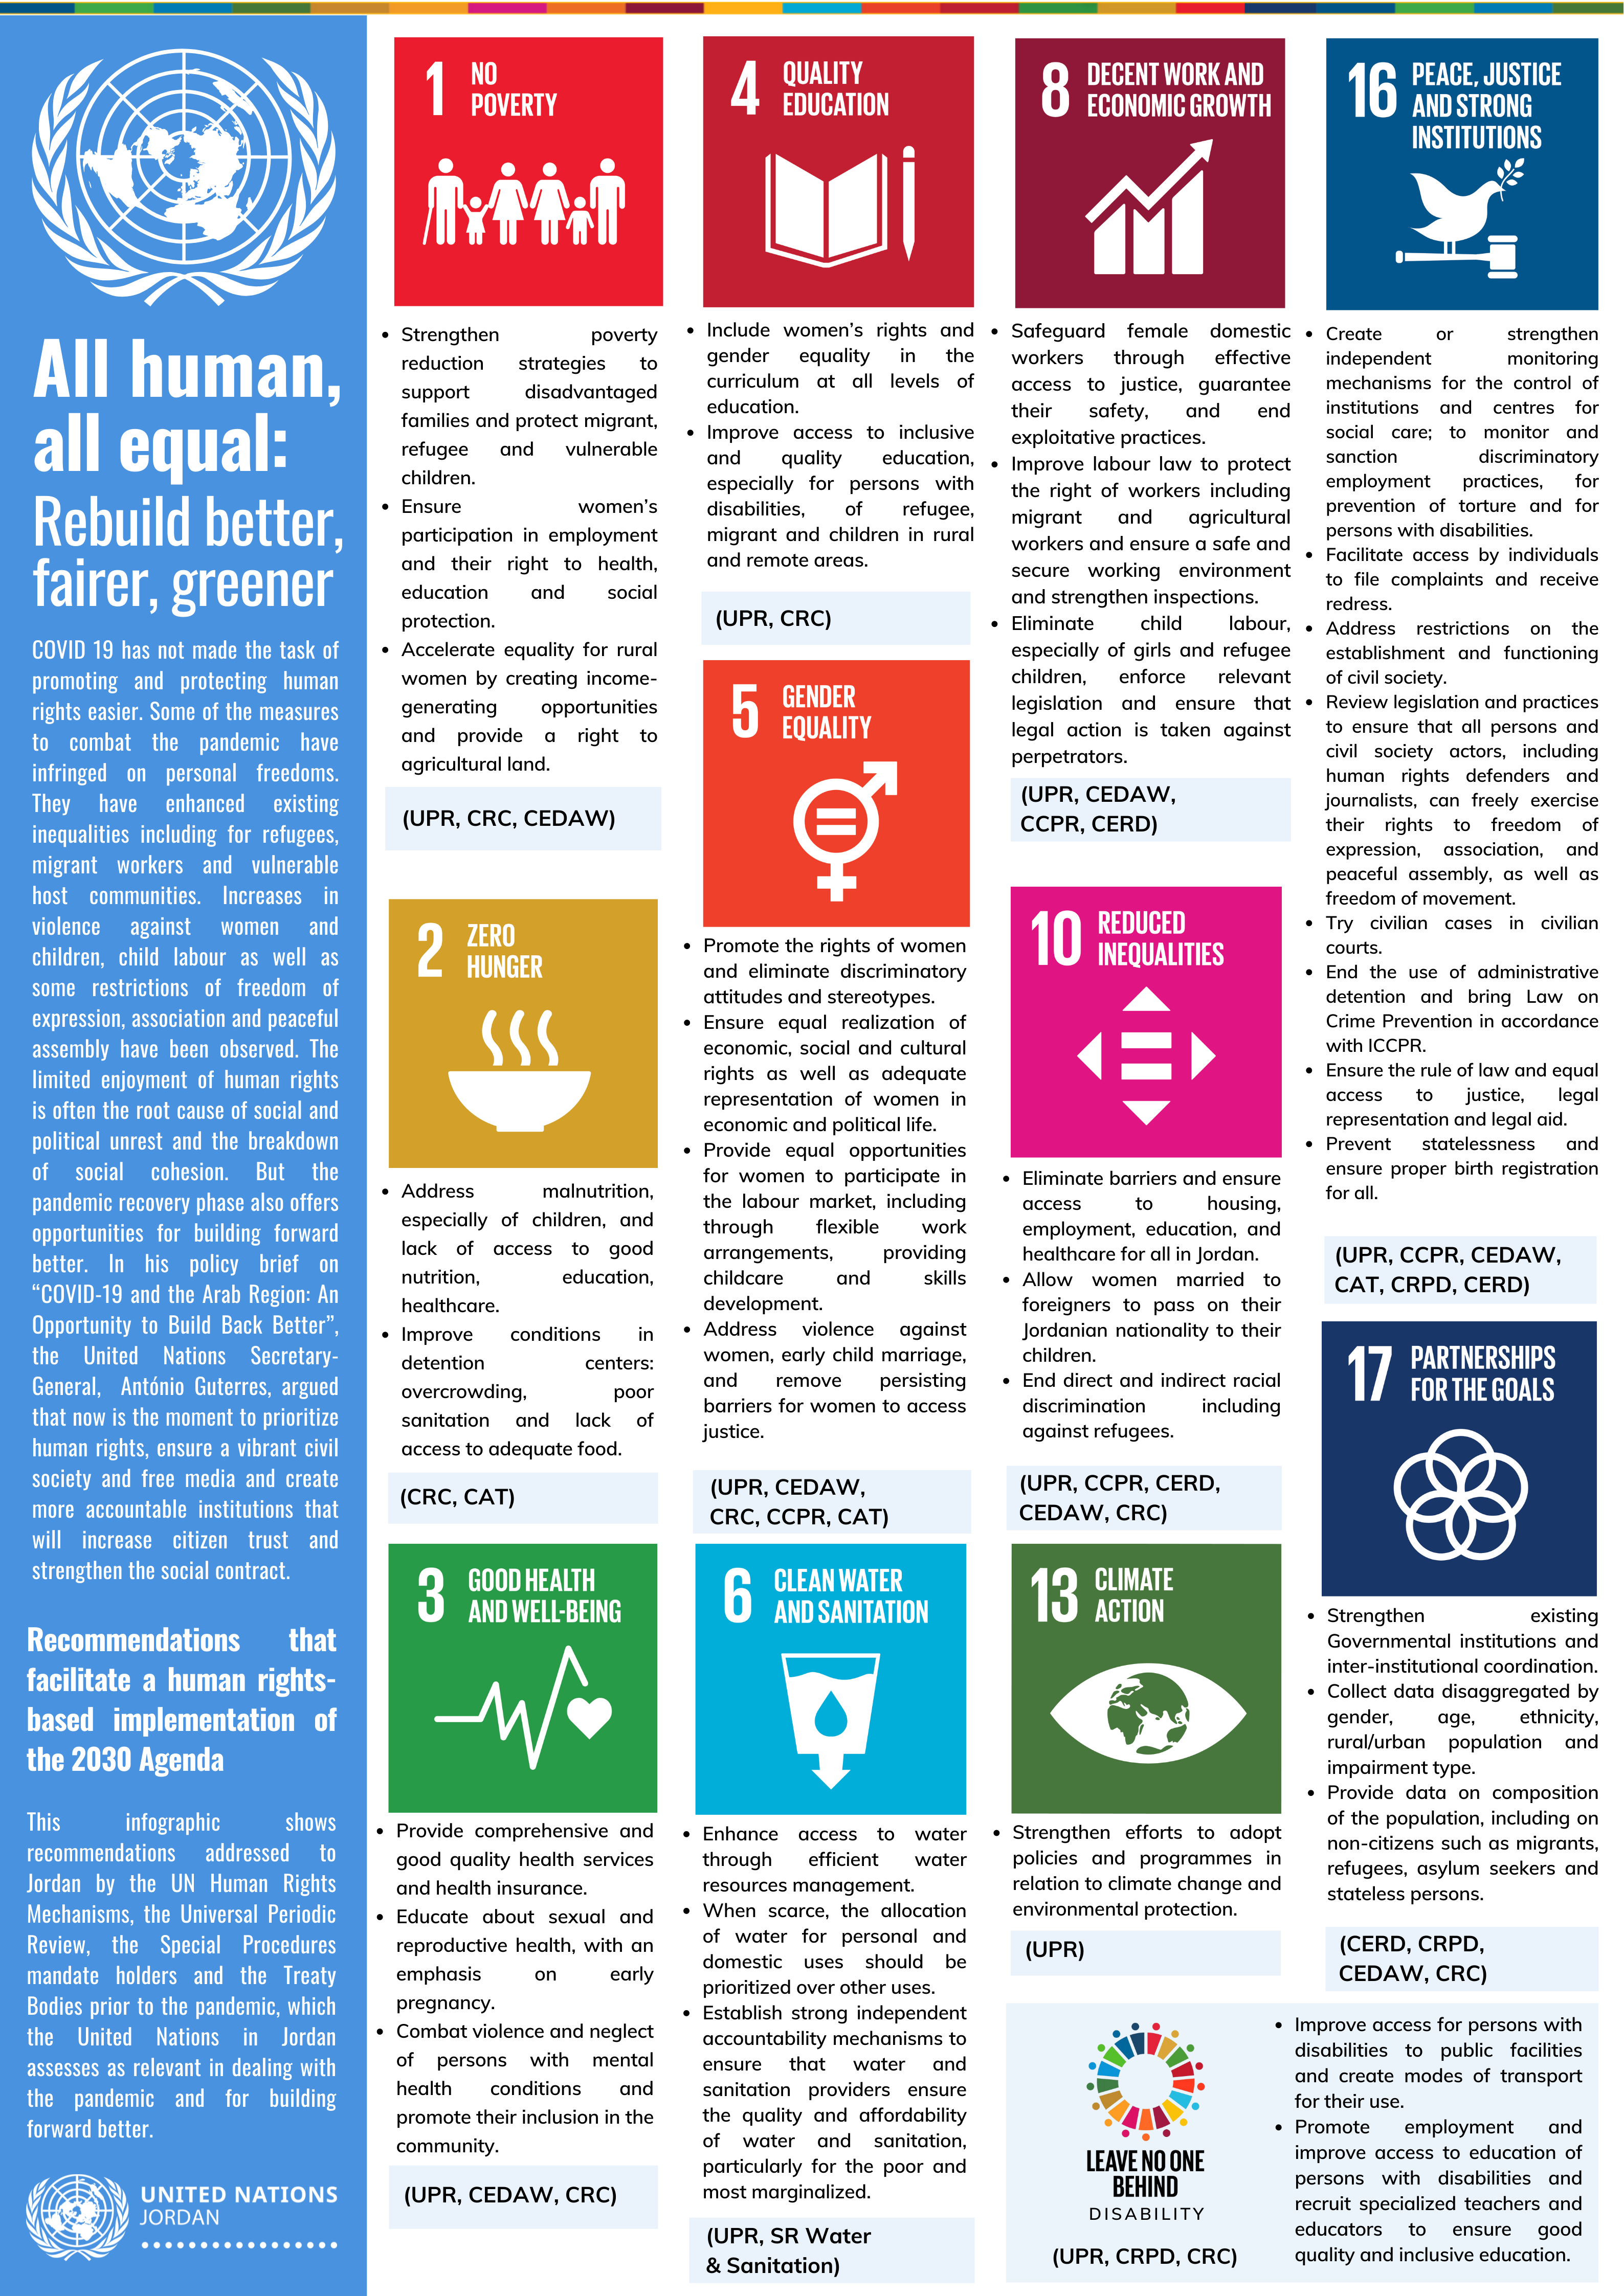 Recommendations that facilitate a human rights-based implementation of the 2030 Agenda 